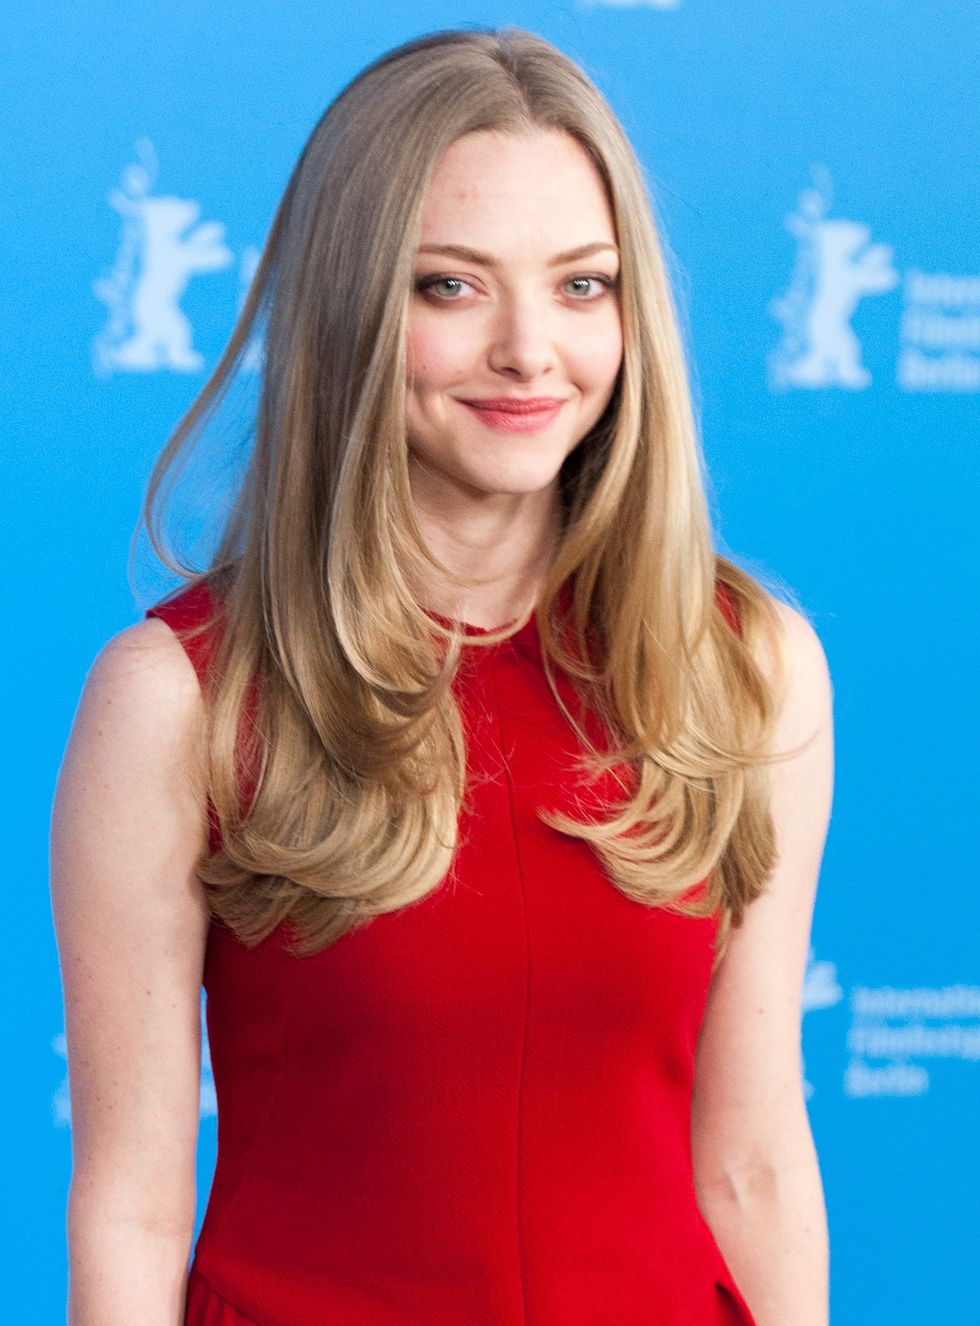 What size are Amanda Seyfried's breasts boobs?